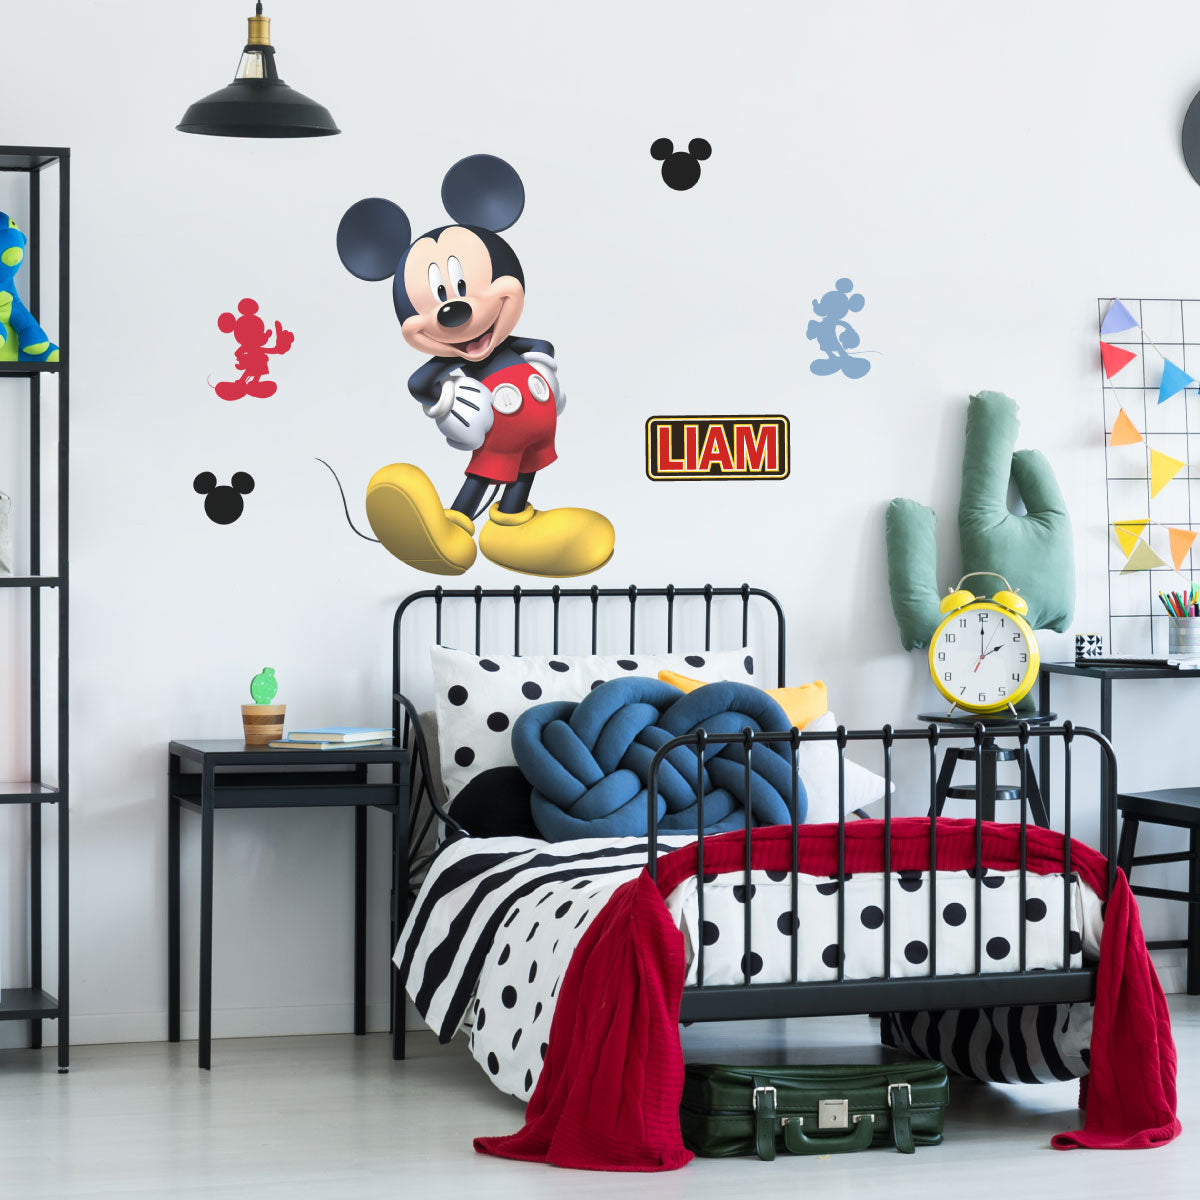 Shop One Piece Wall Sticker Wanted online